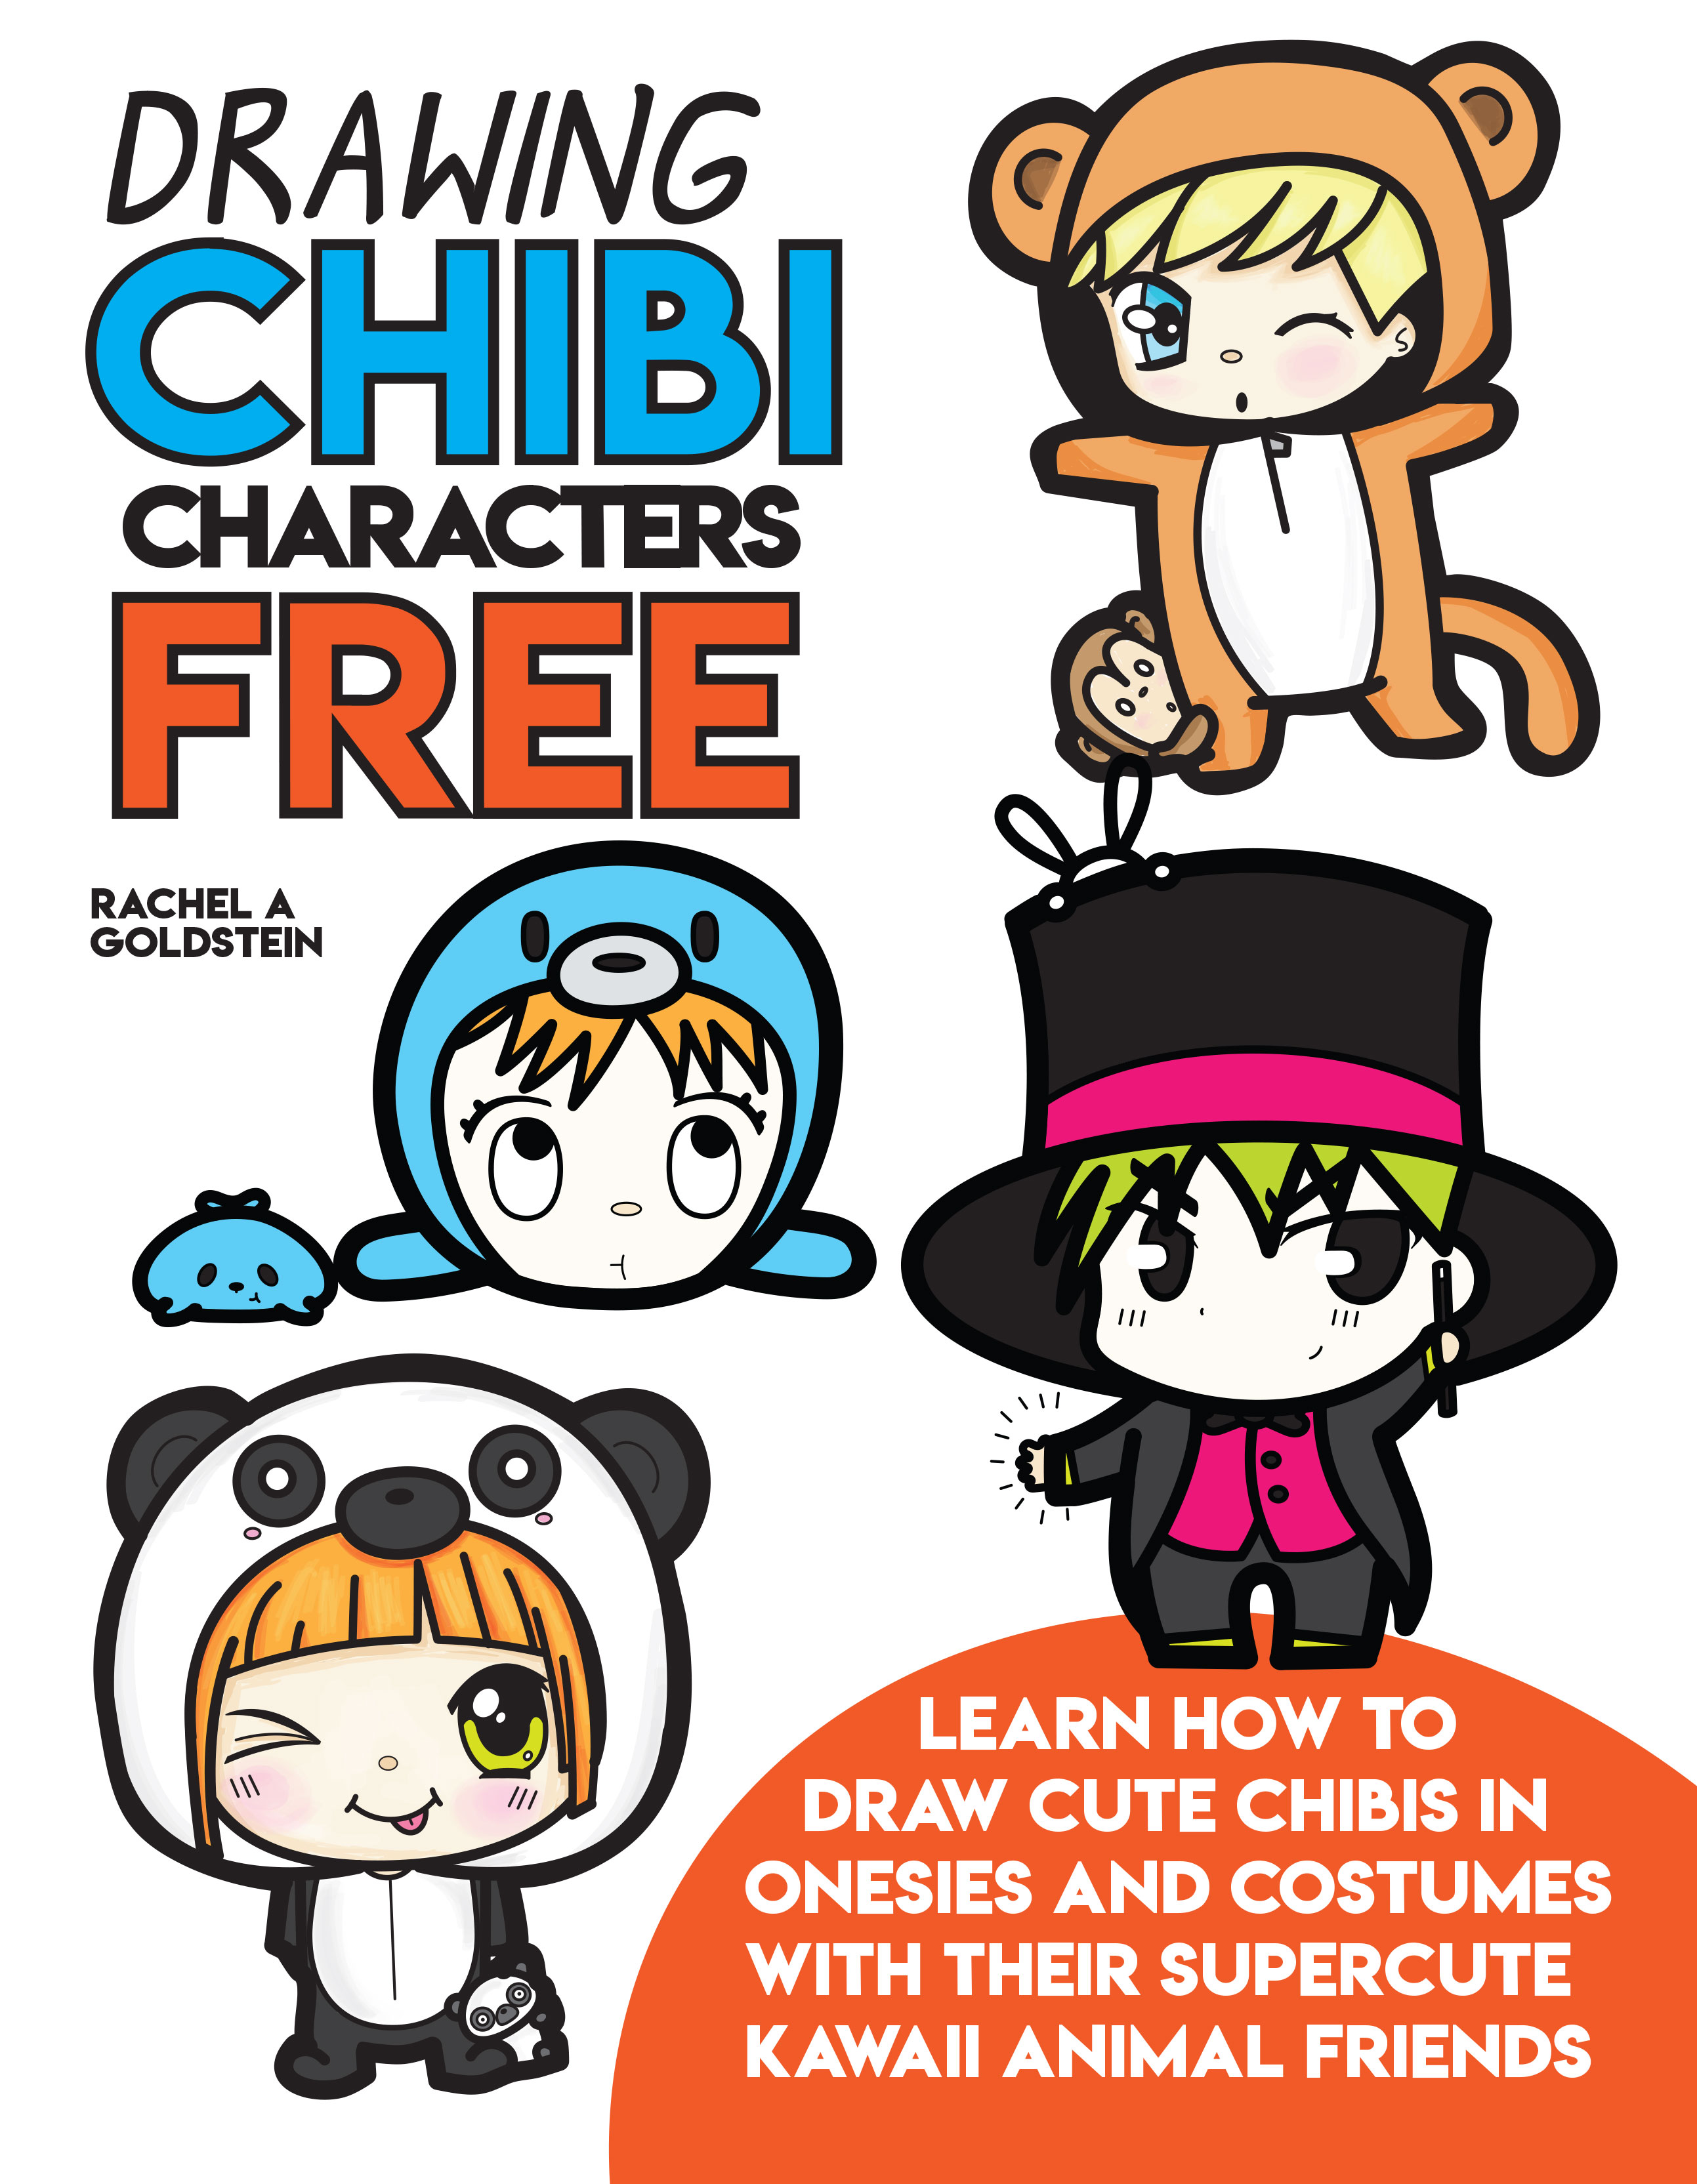 Free Drawing Chibi Characters Book for Kids